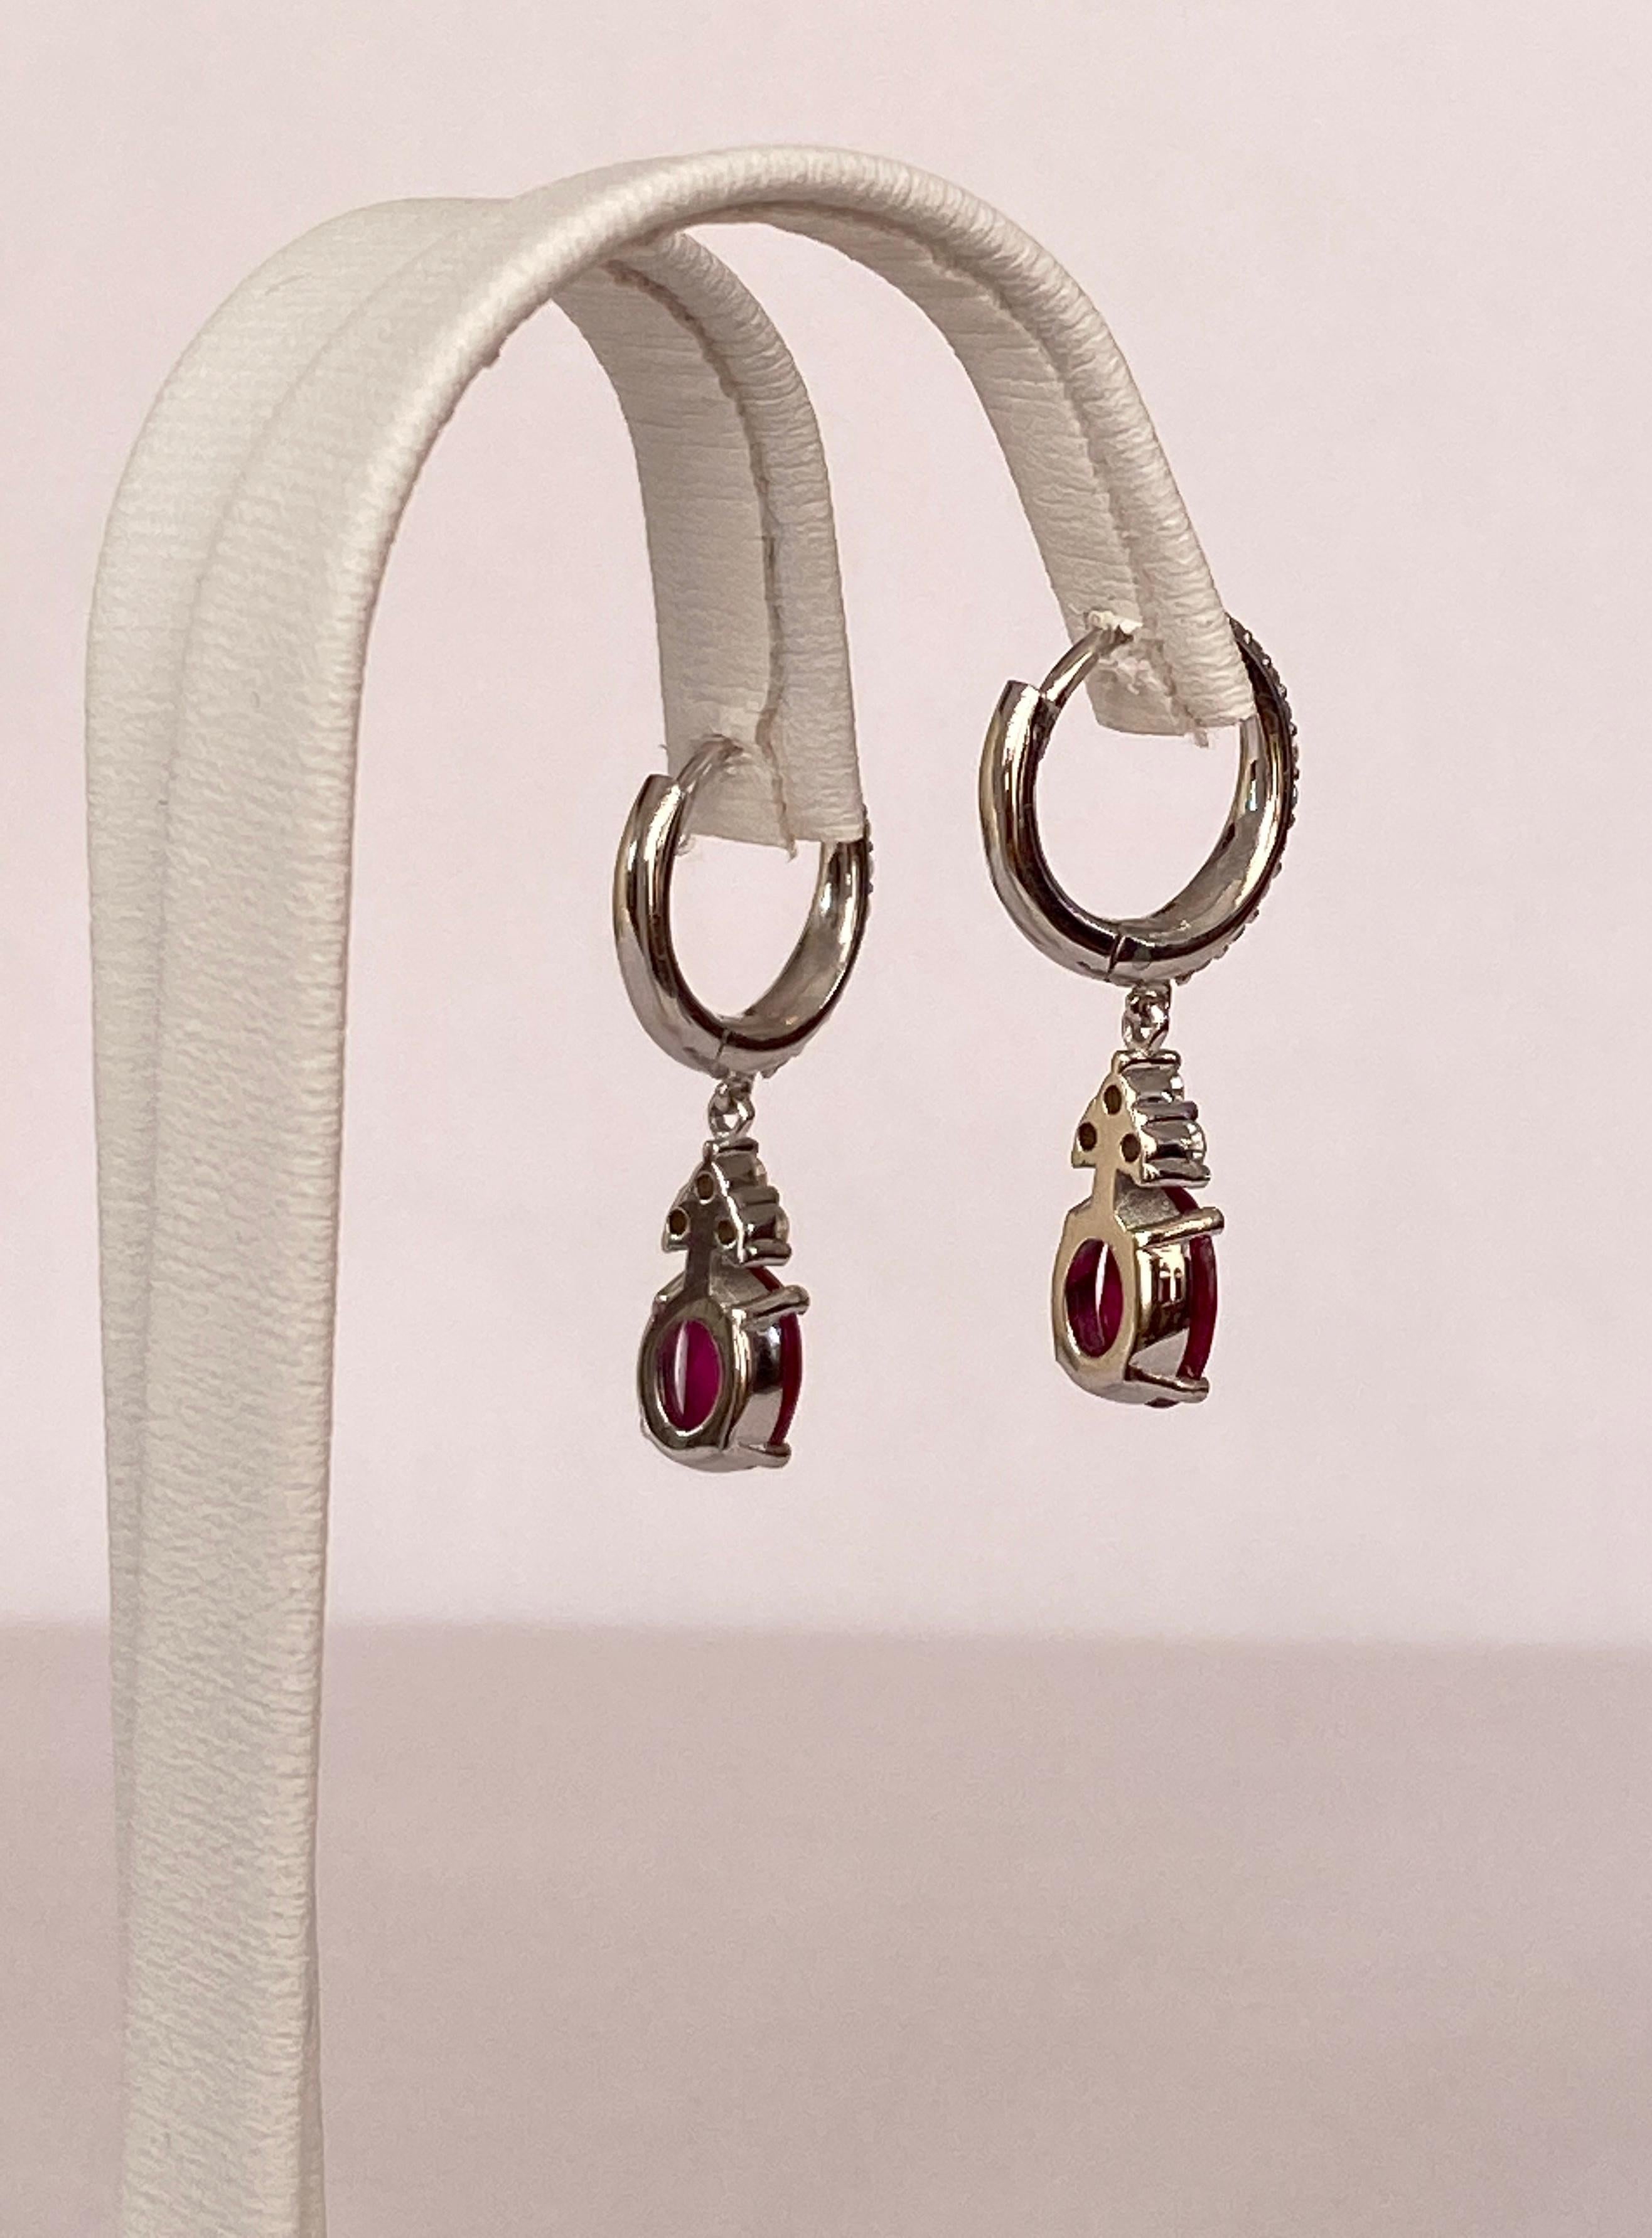 ALGT Certified 18 Kt. White Gold Earrings with 2.28 Ct Rubies and Diamonds For Sale 1